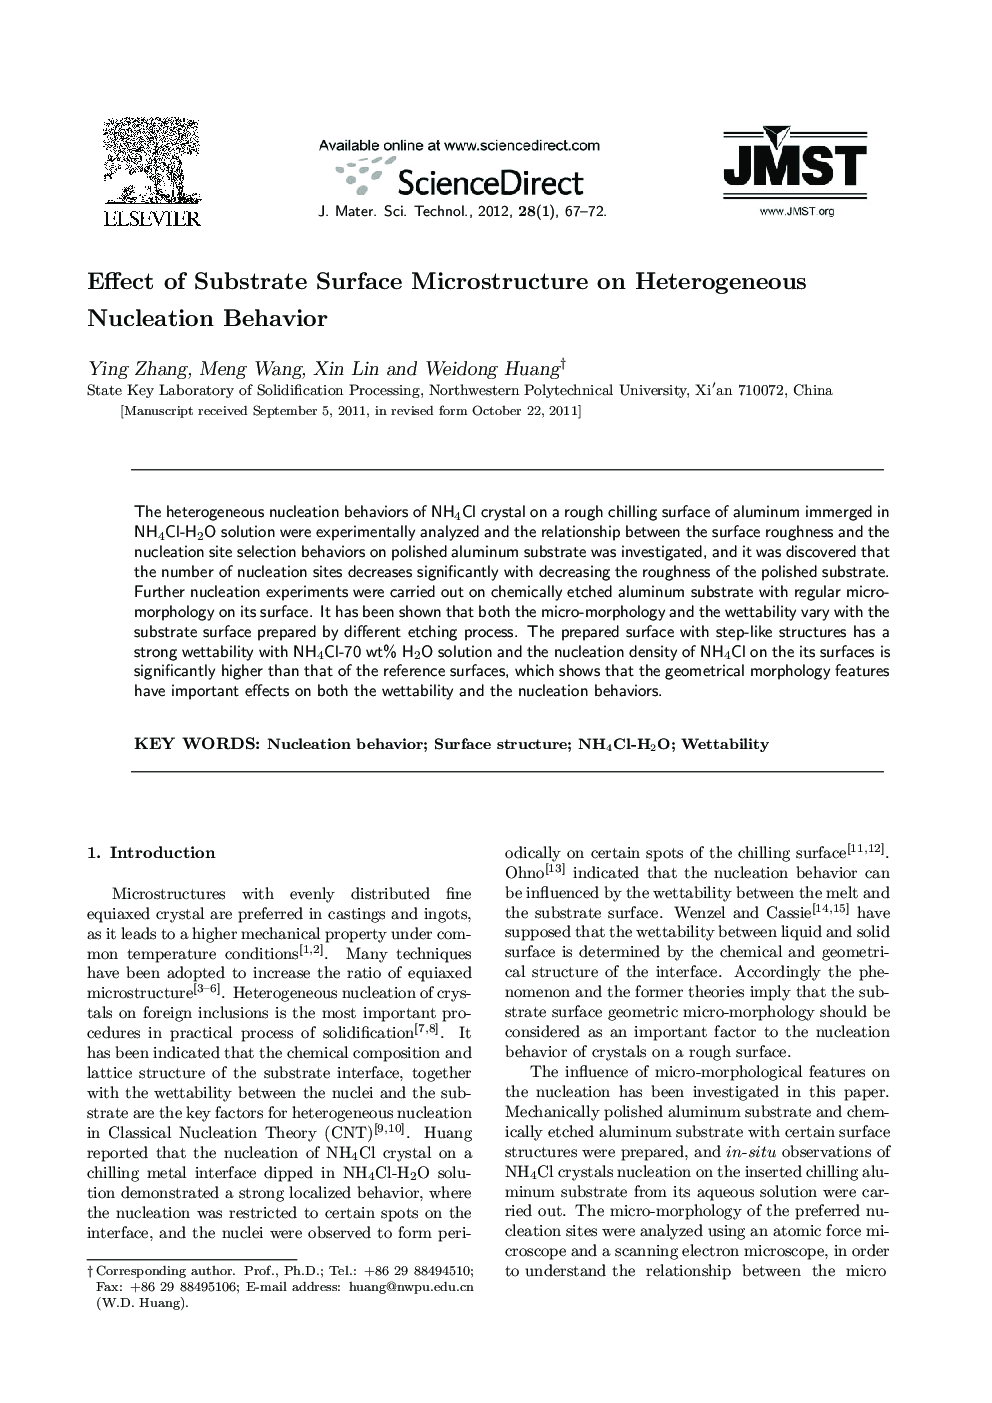 Effect of Substrate Surface Microstructure on Heterogeneous Nucleation Behavior